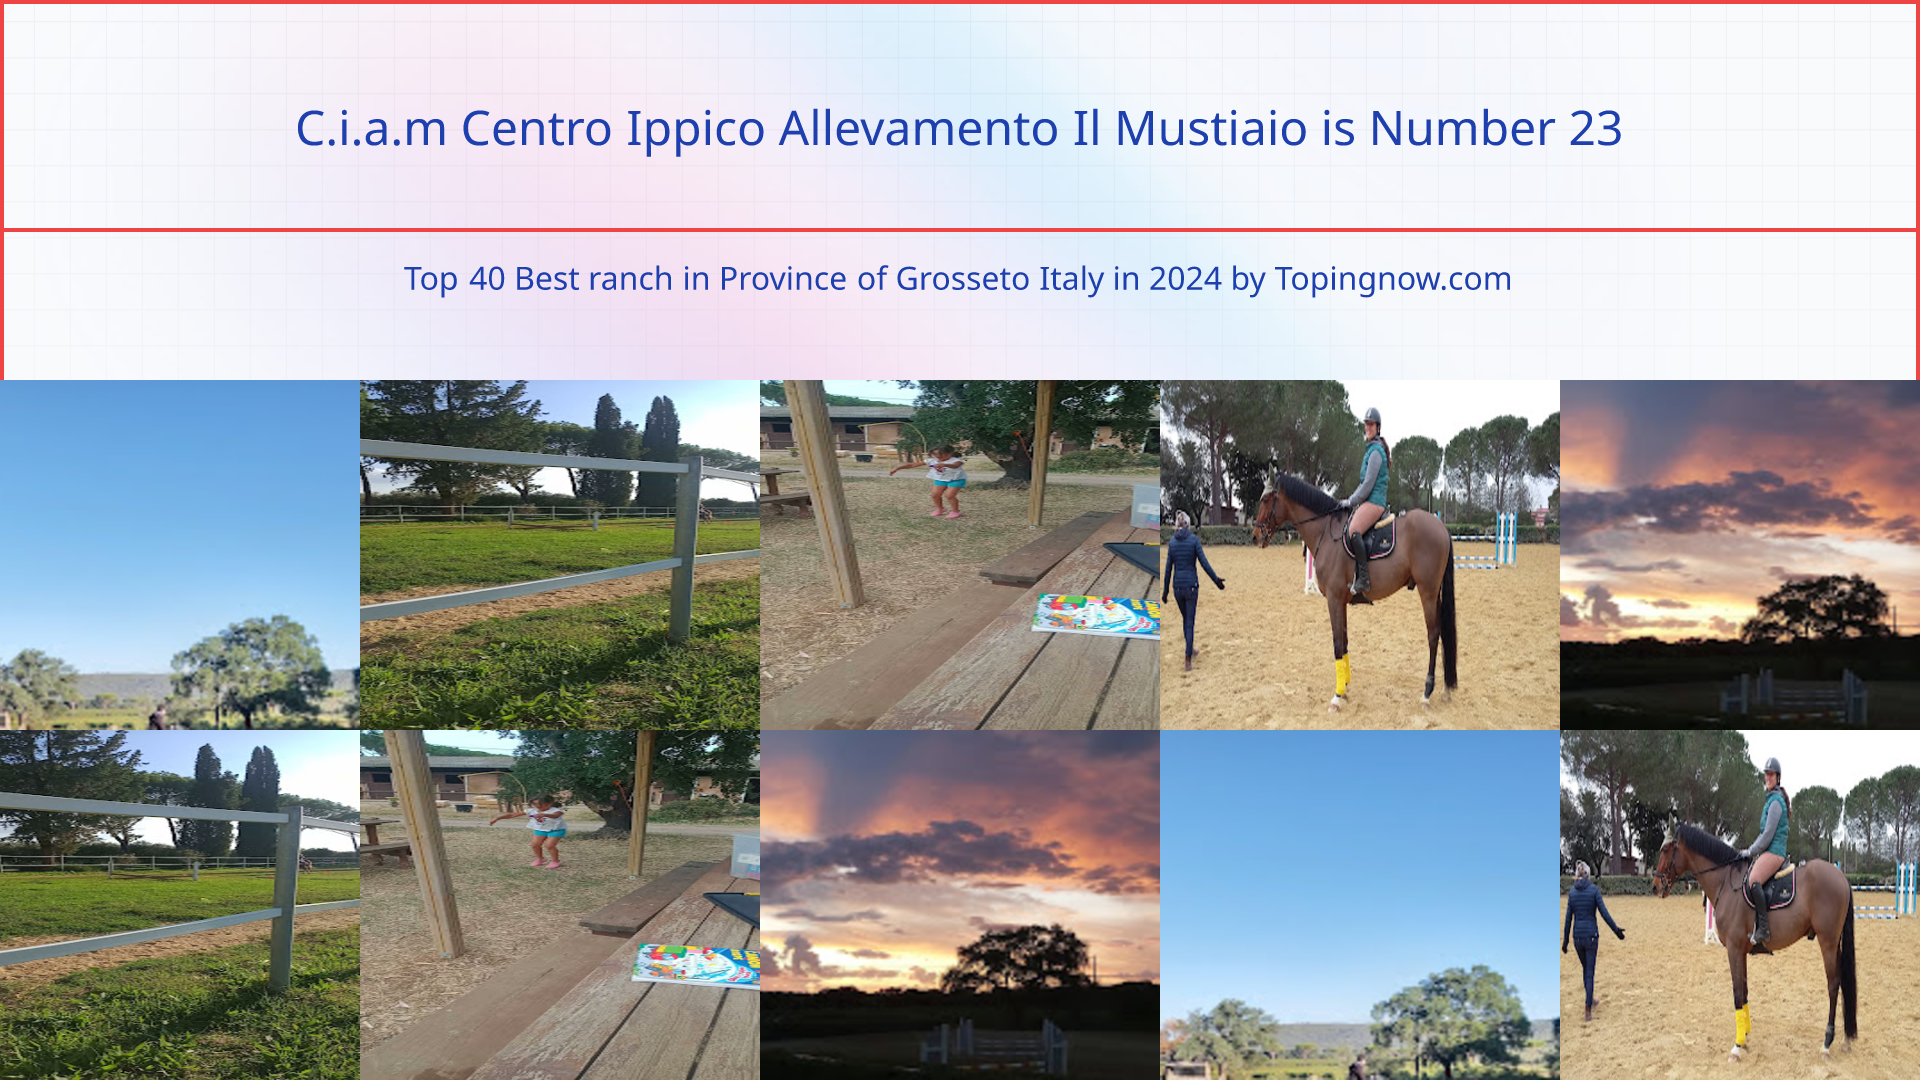 C.i.a.m Centro Ippico Allevamento Il Mustiaio: Top 40 Best ranch in Province of Grosseto Italy in 2024